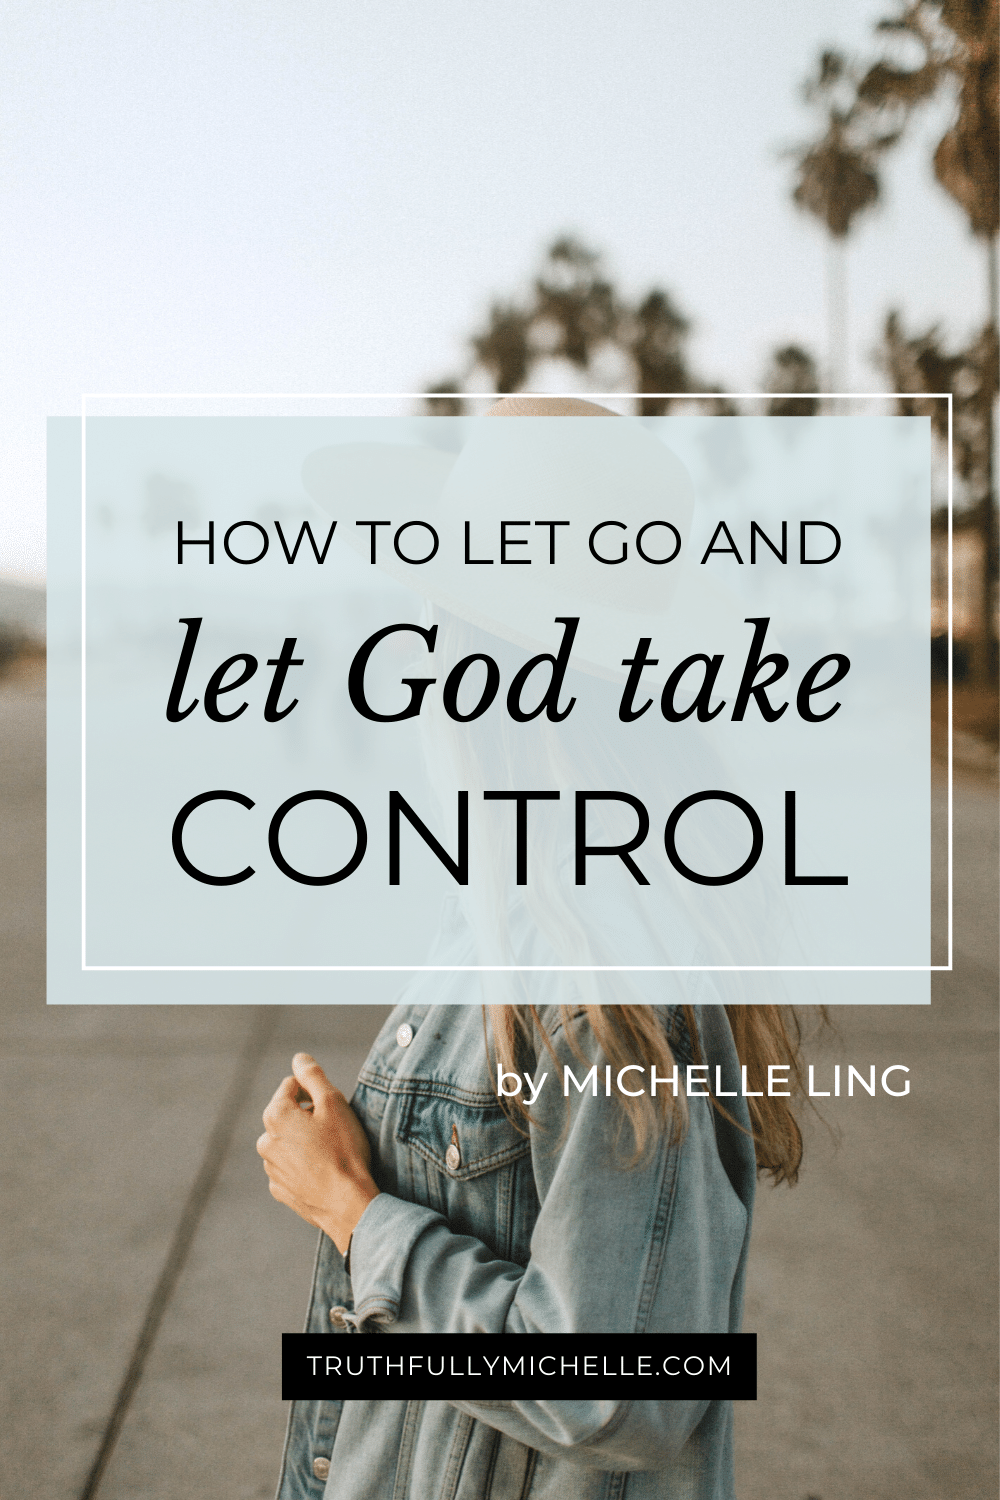 Letting go and letting God take control, How to let God take control of your life, When you let God take control, Allowing God to lead, Giving up control to God, Let God control your life, Allowing God to take control, How to give God control, God controls my life and destiny, How to have faith in God completely, How to let God take control, How to fully trust God, How to trust God in hard times spiritual inspiration and encouragement